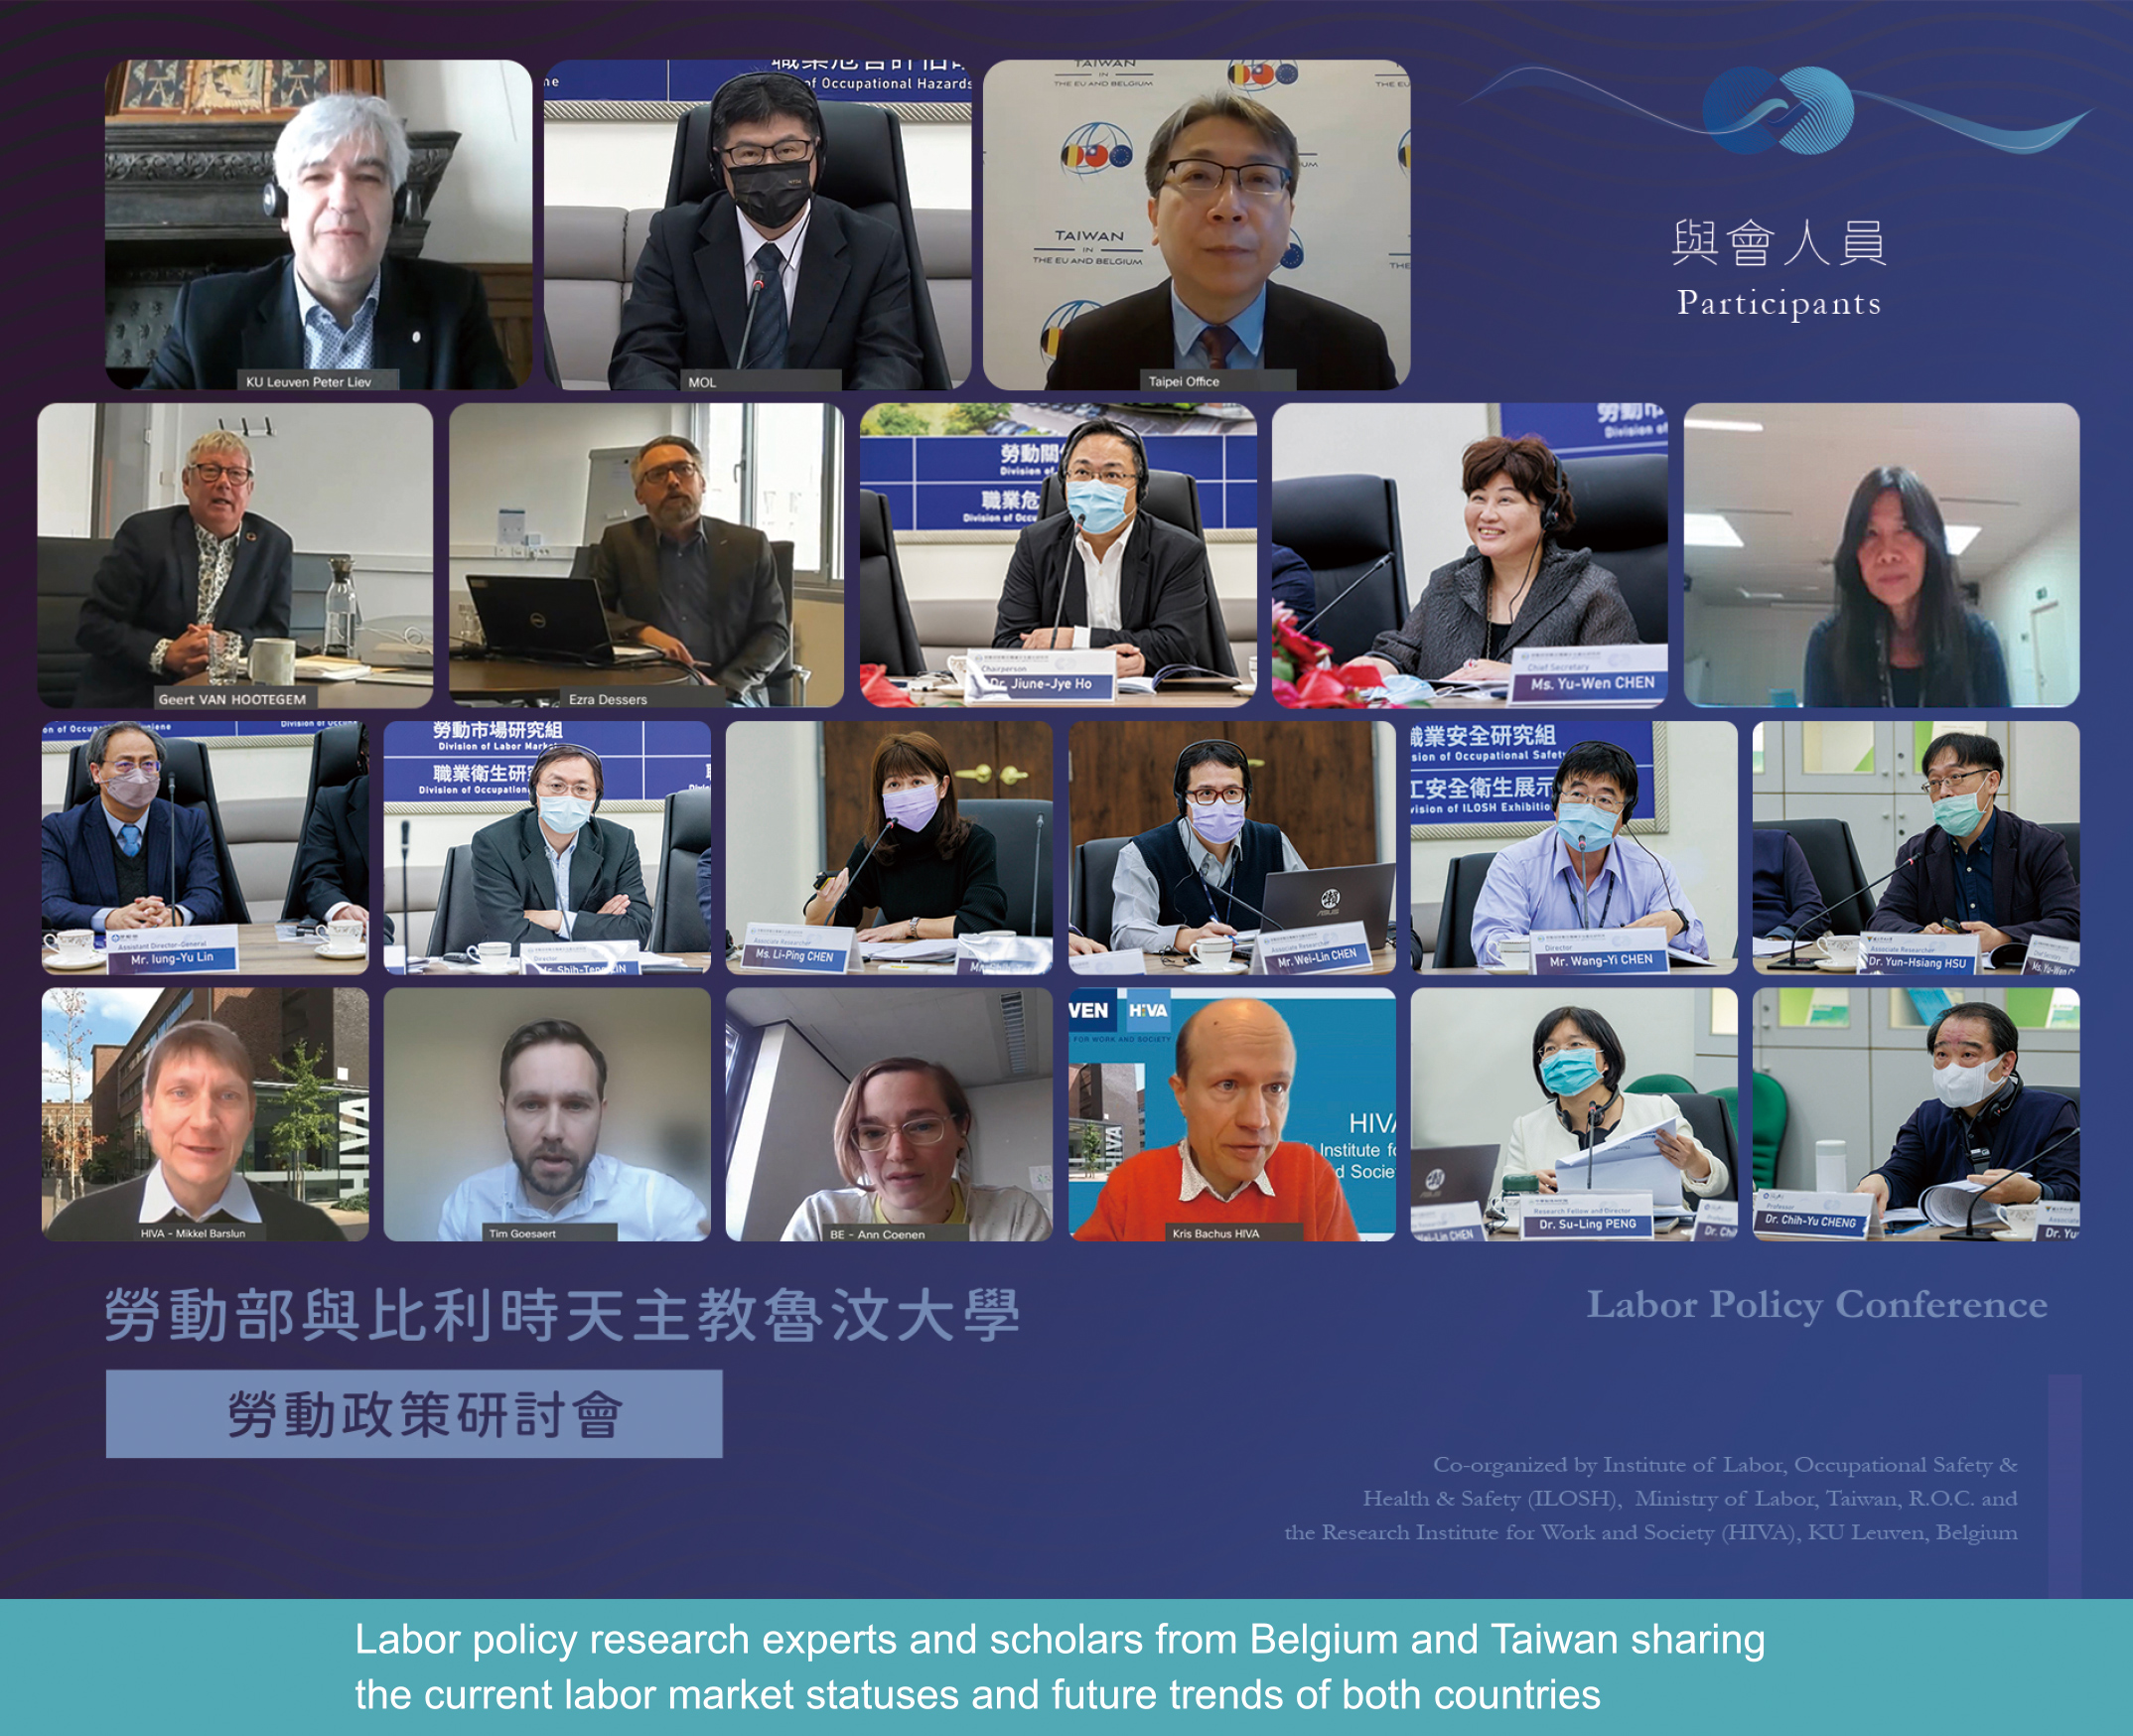 MOL and HIVA Research Institute for Work and Society of Katholieke Universiteit Leuven Held the First Labor Policy Conference for the Discussion of the Labor Policies of Taiwan and Europe